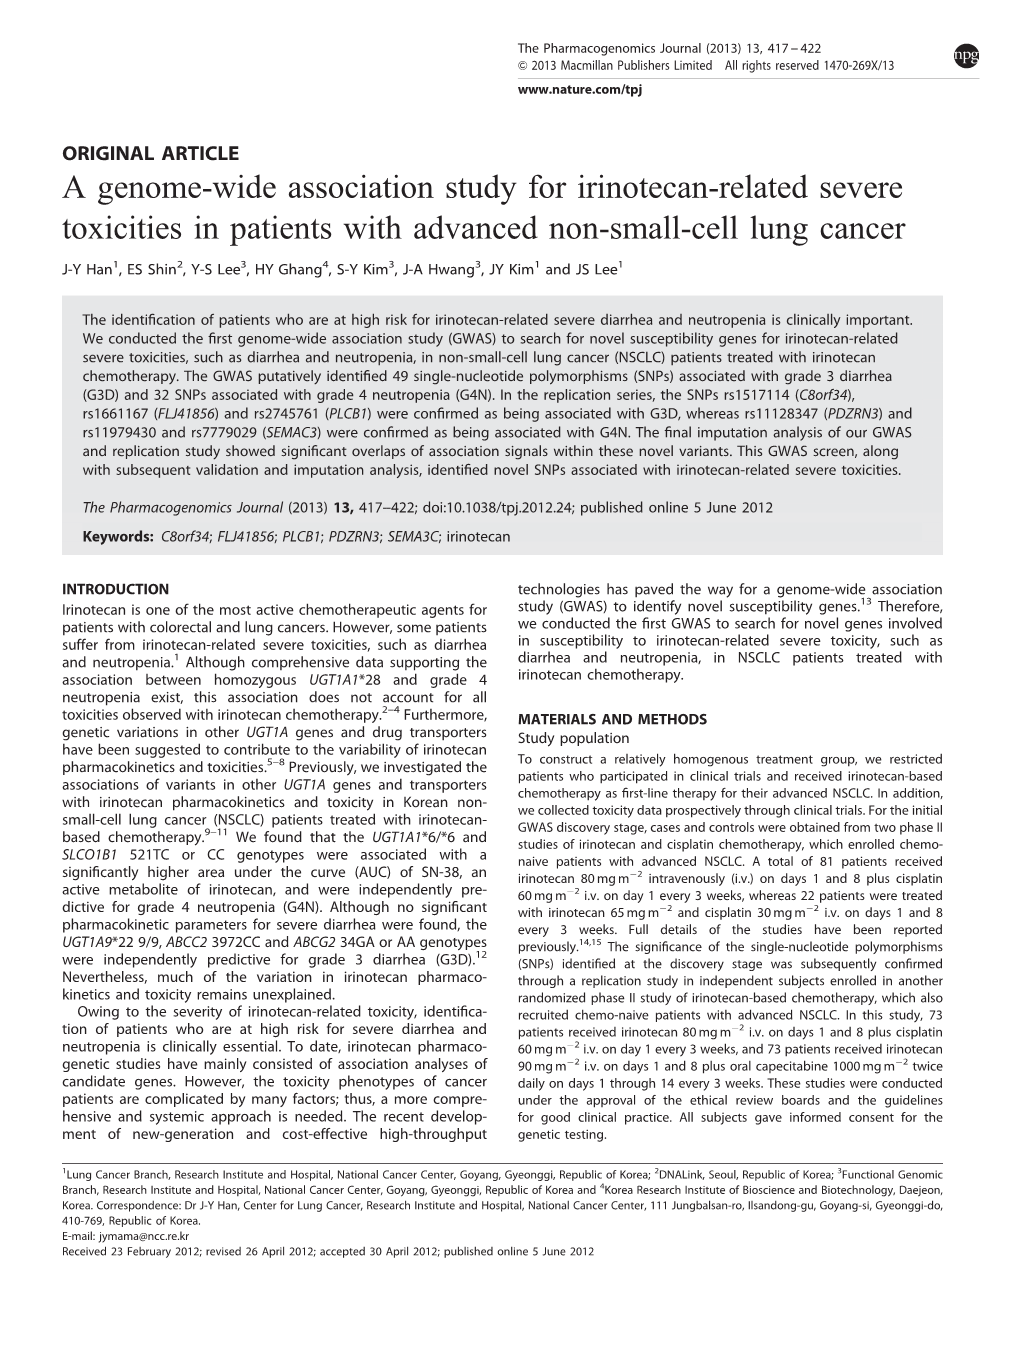 A Genome-Wide Association Study for Irinotecan-Related Severe Toxicities in Patients with Advanced Non-Small-Cell Lung Cancer